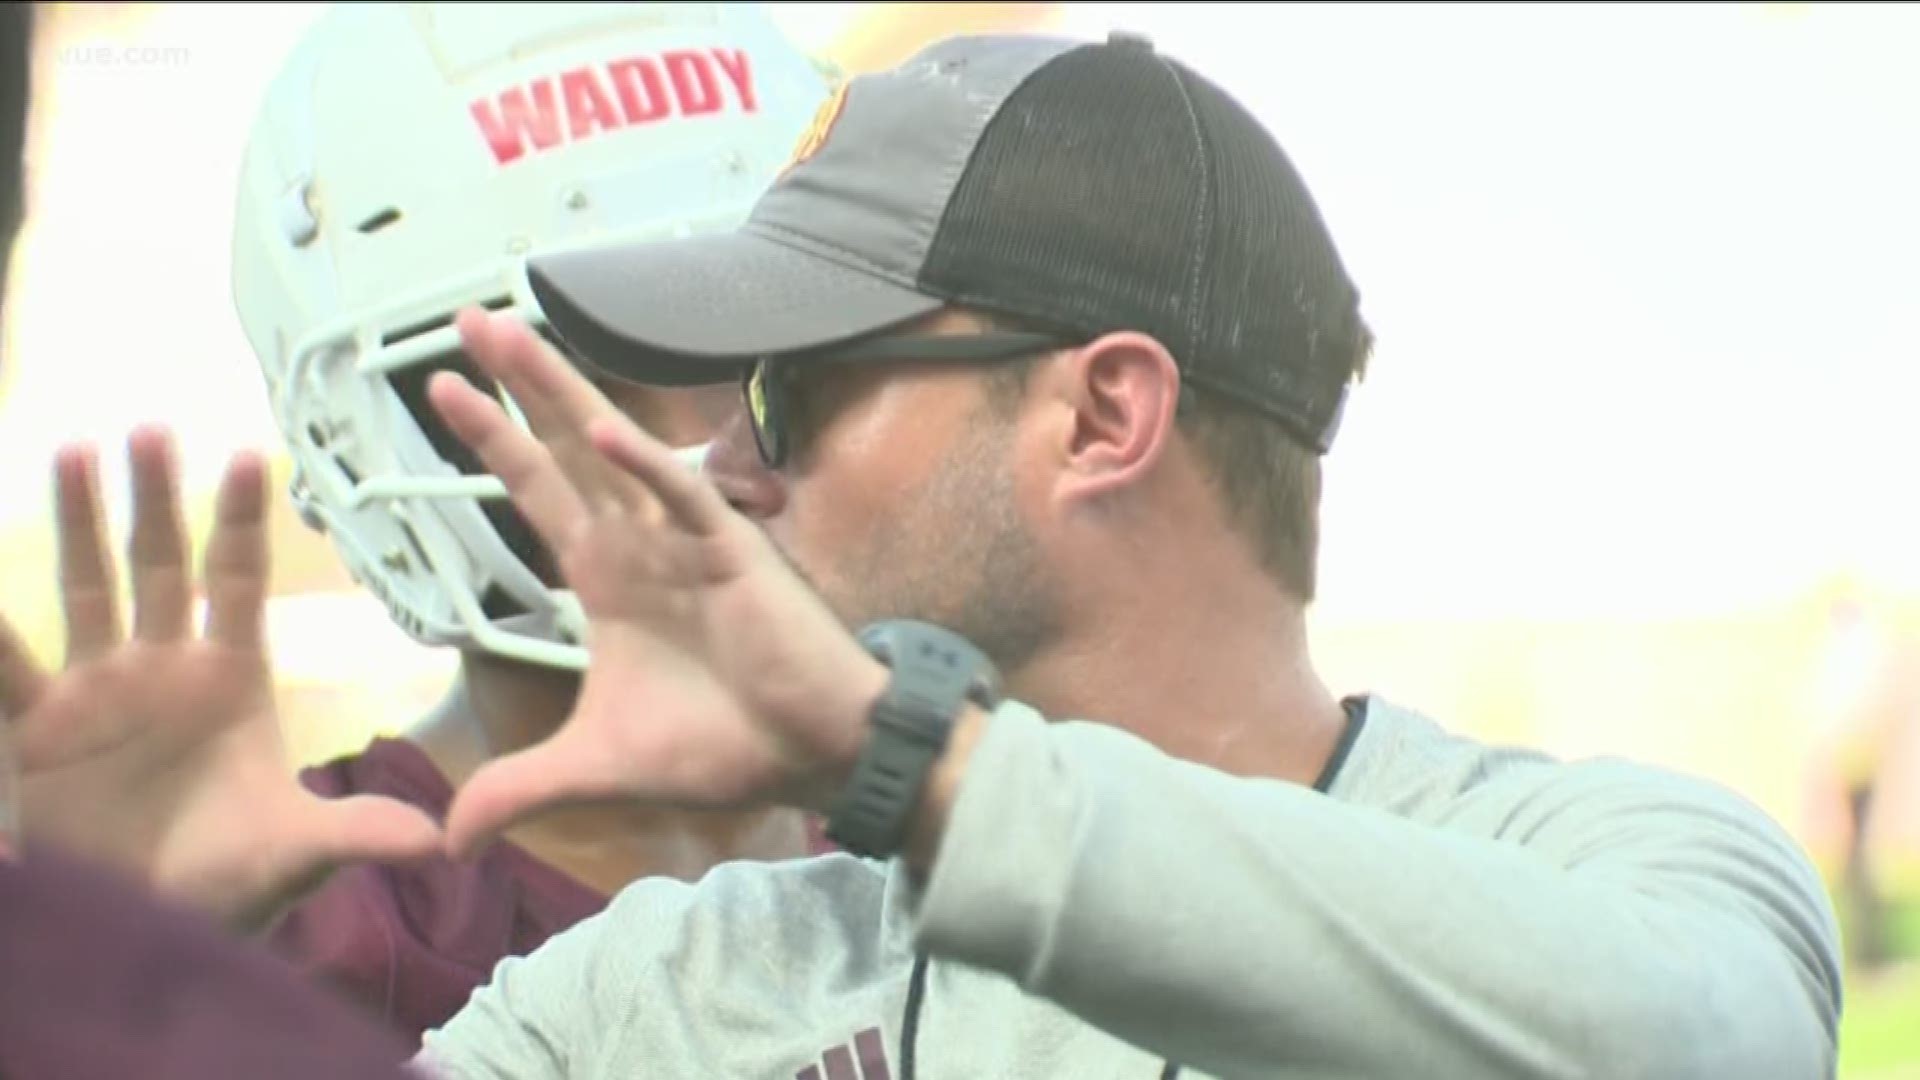 Head coach Jake Spavital joins older brother and defensive coordinator Zac Spavital to begin the rebuild process at Texas State.